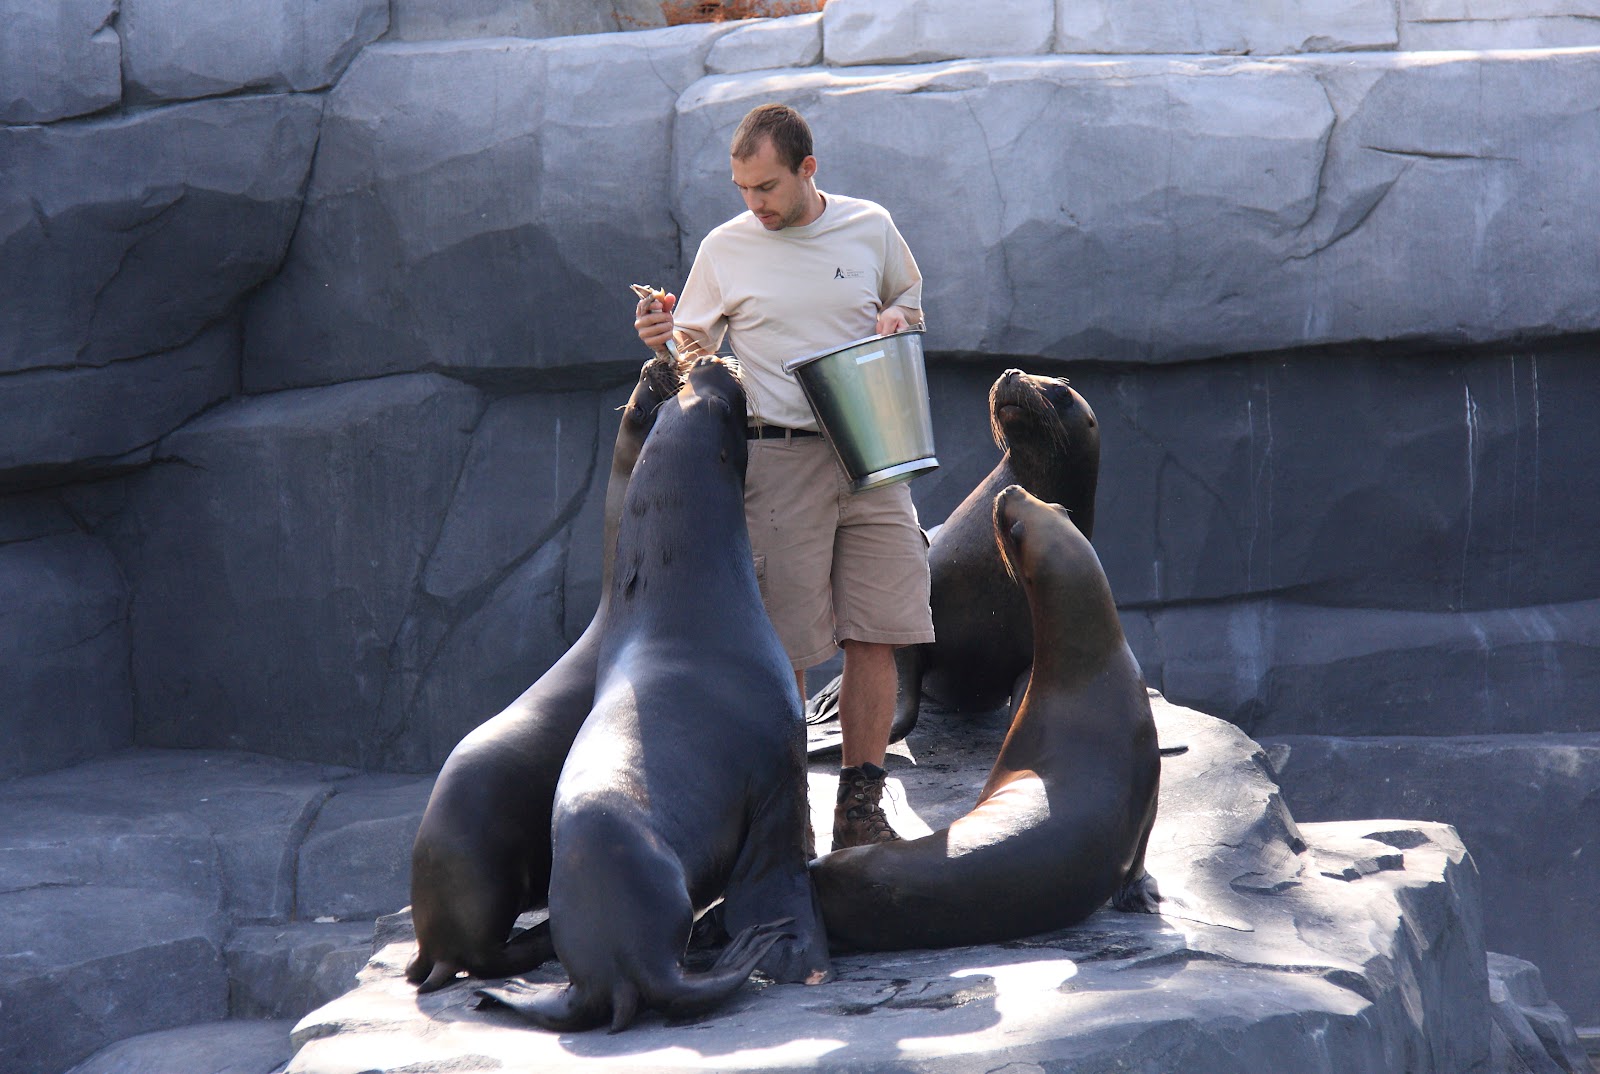 What Are The Zookeepers’ Duties & Responsibilities?